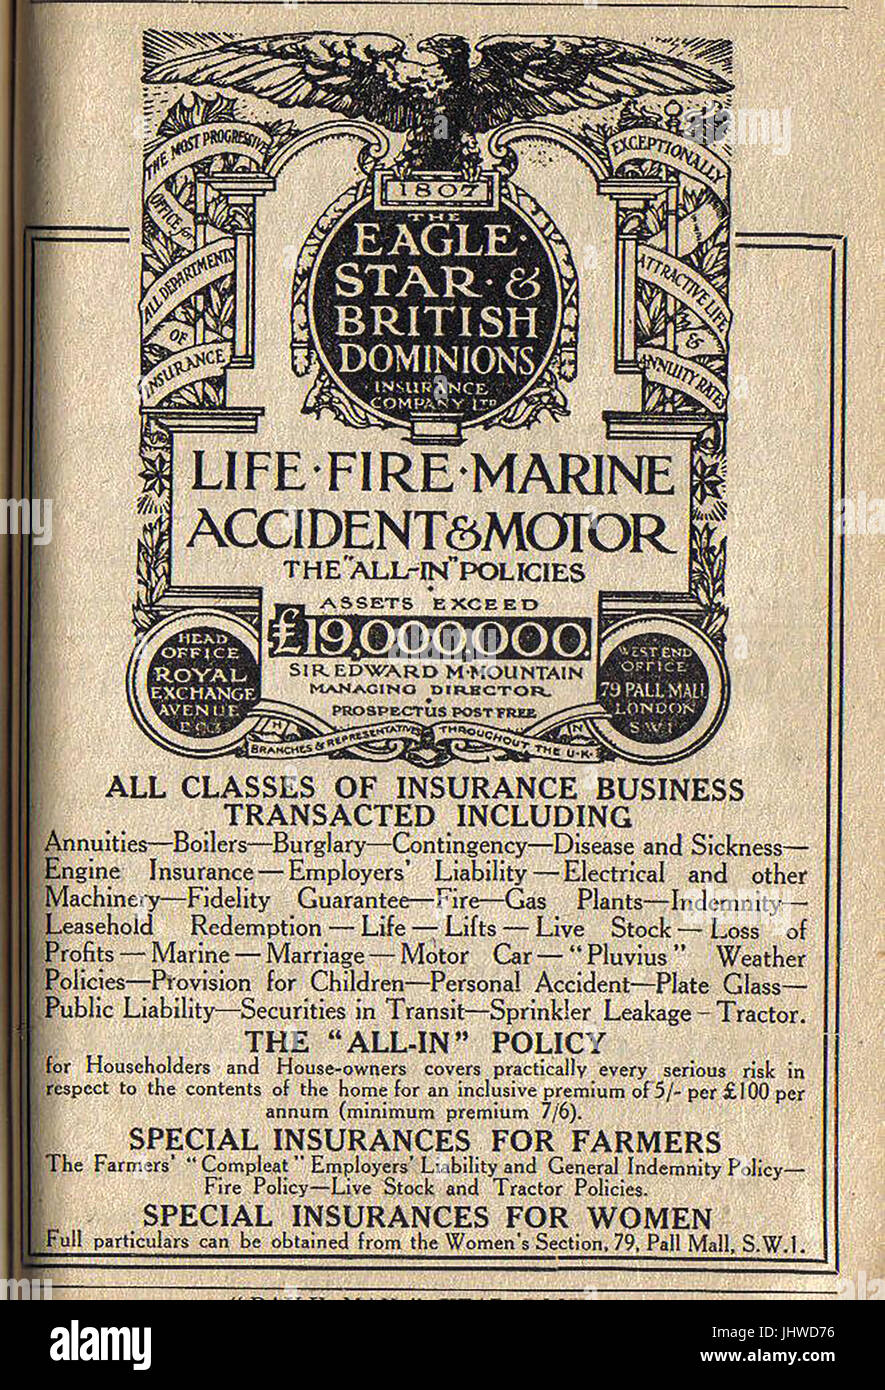 Eagle Star and British Dominions Insurance advert 1922 Stock Photo